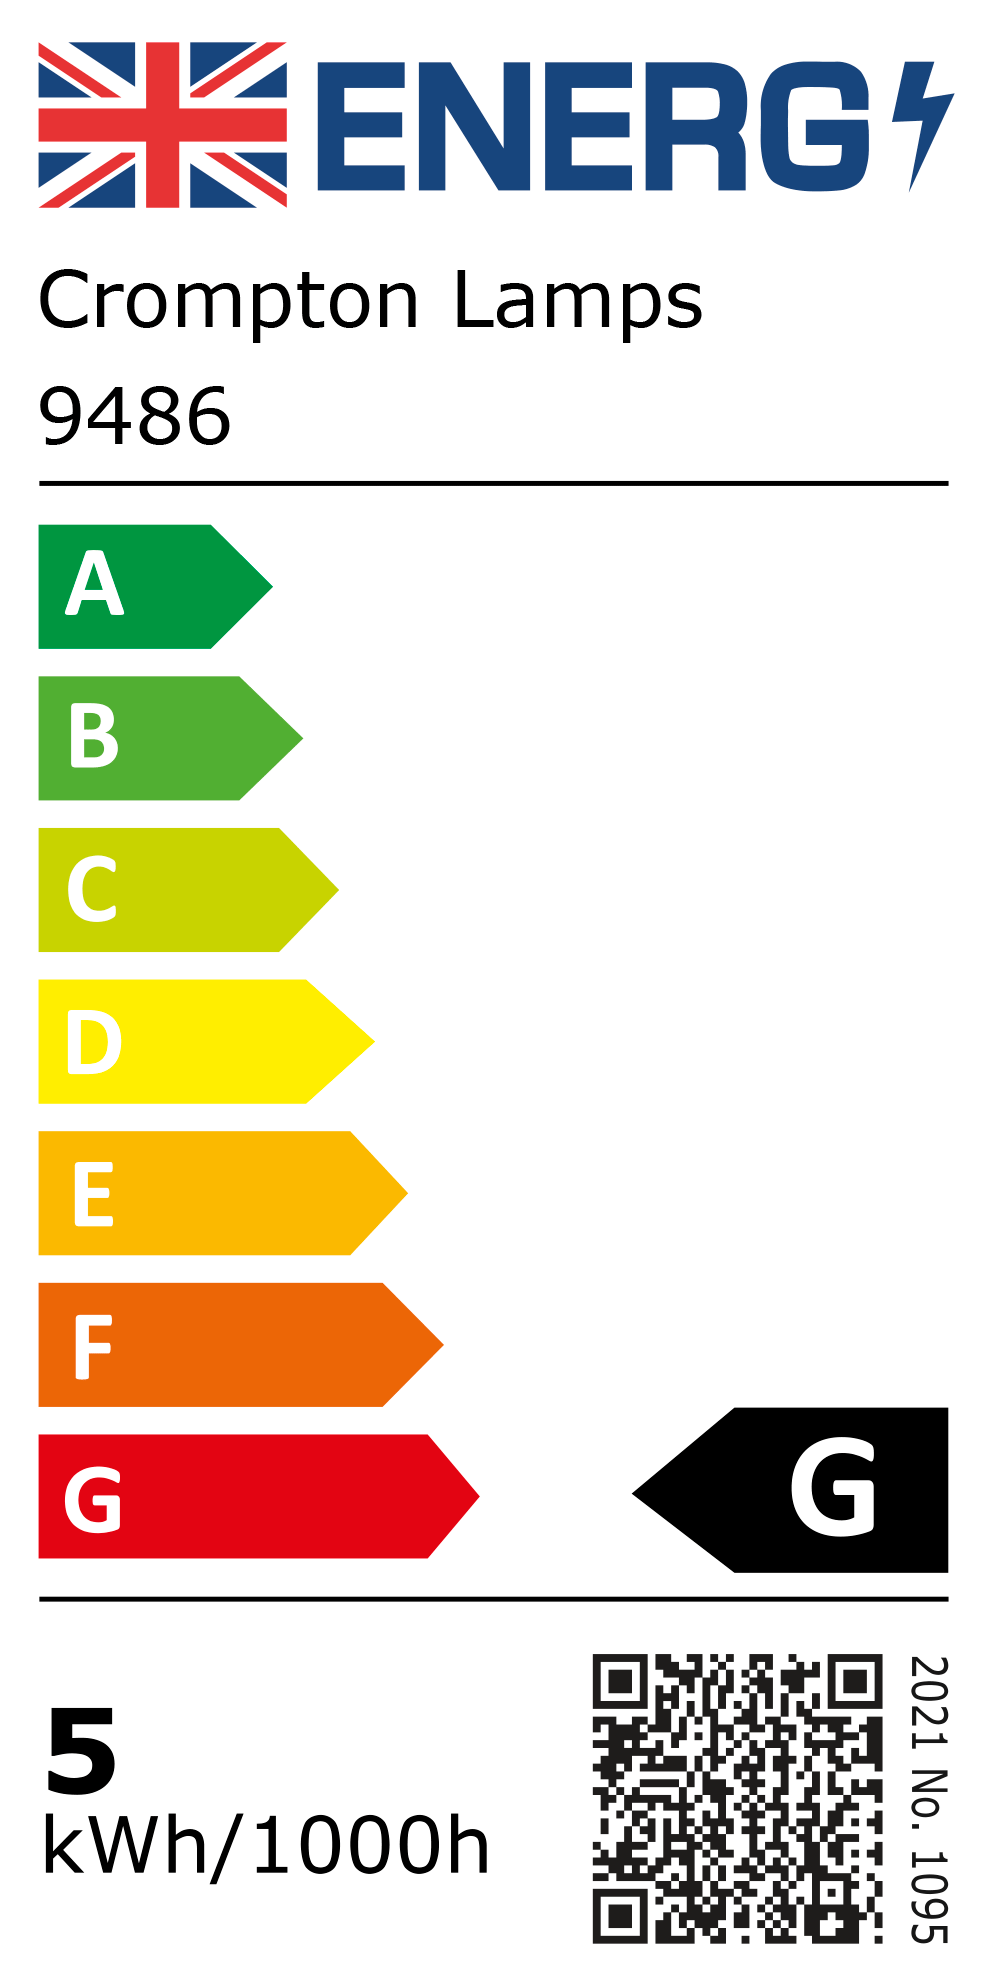 New 2021 Energy Rating Label: Stock Code 9486